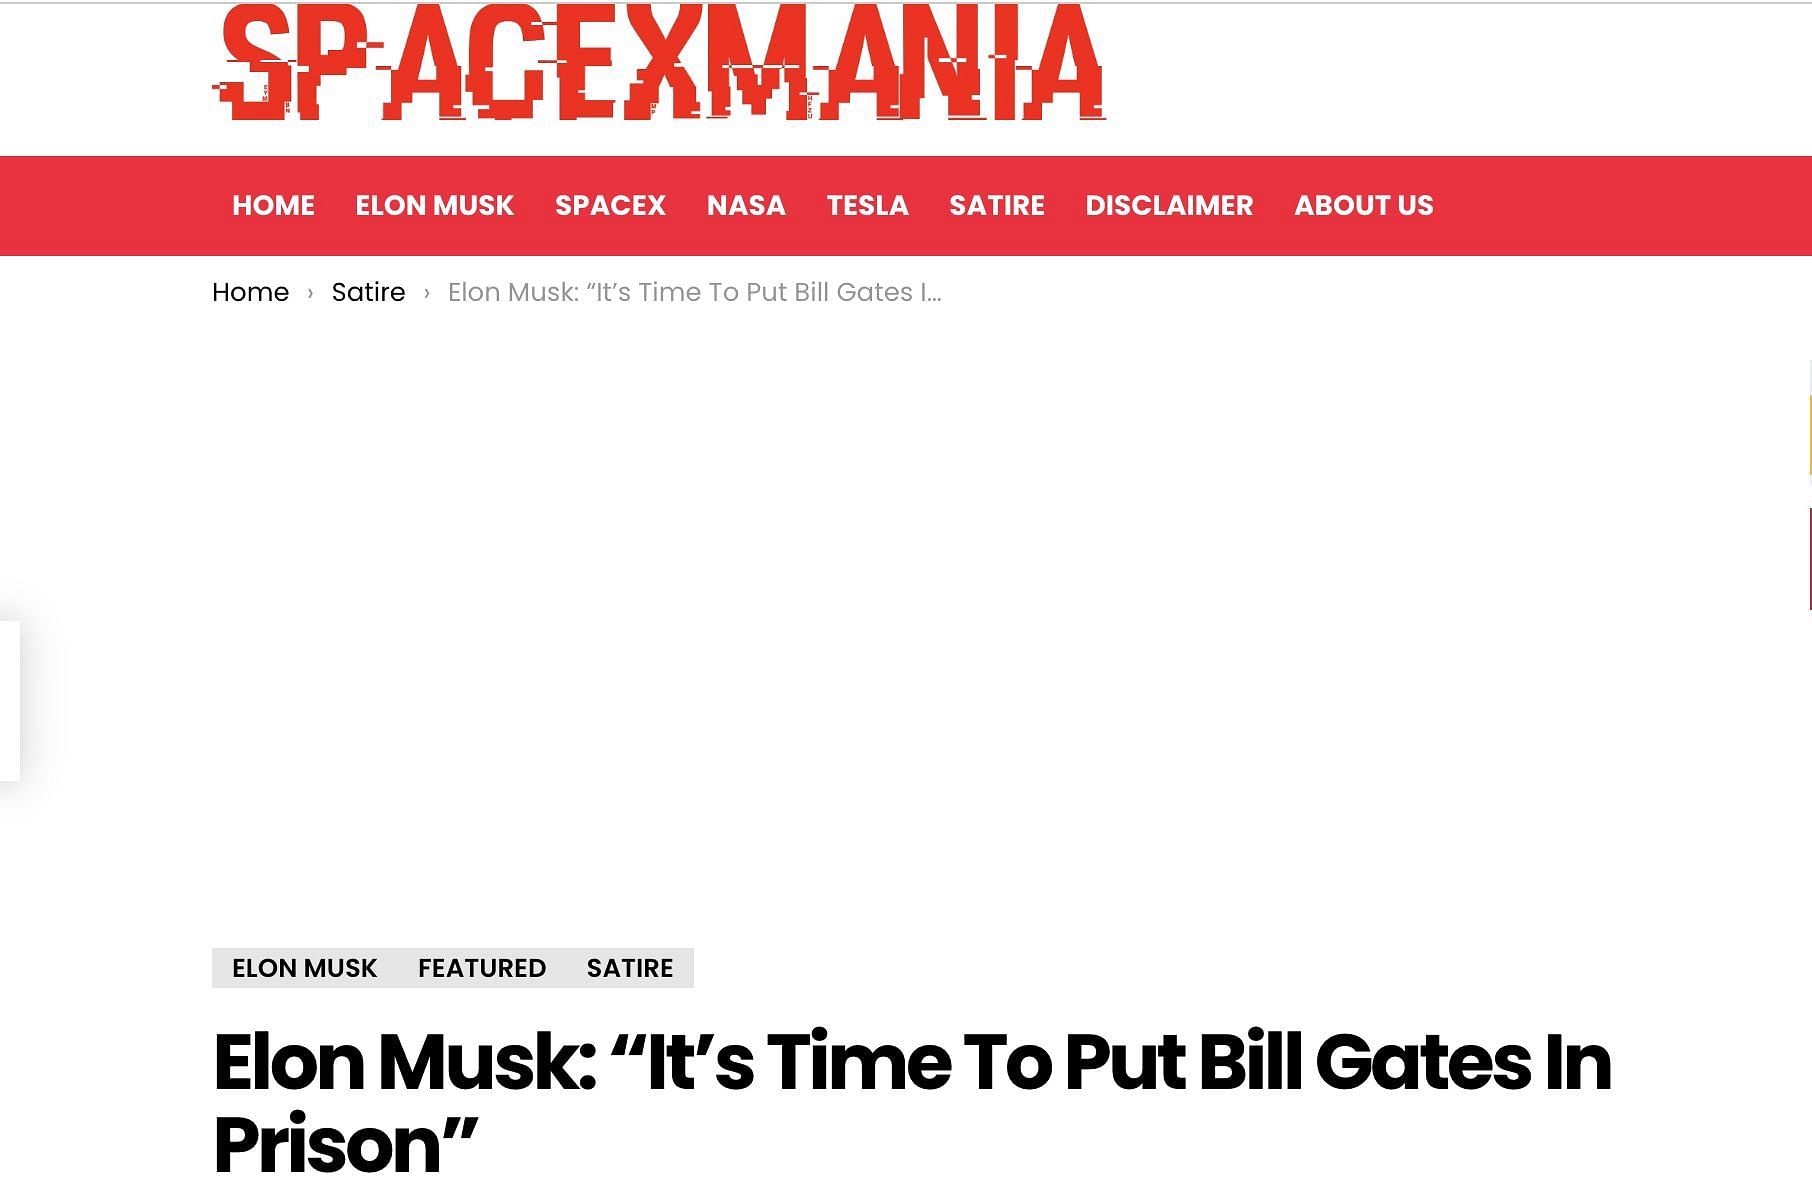 Fake news debunked as an article published on a website claimed Elon Musk suggested that Bill Gates should be put in prison. (Image via Space X Media) 